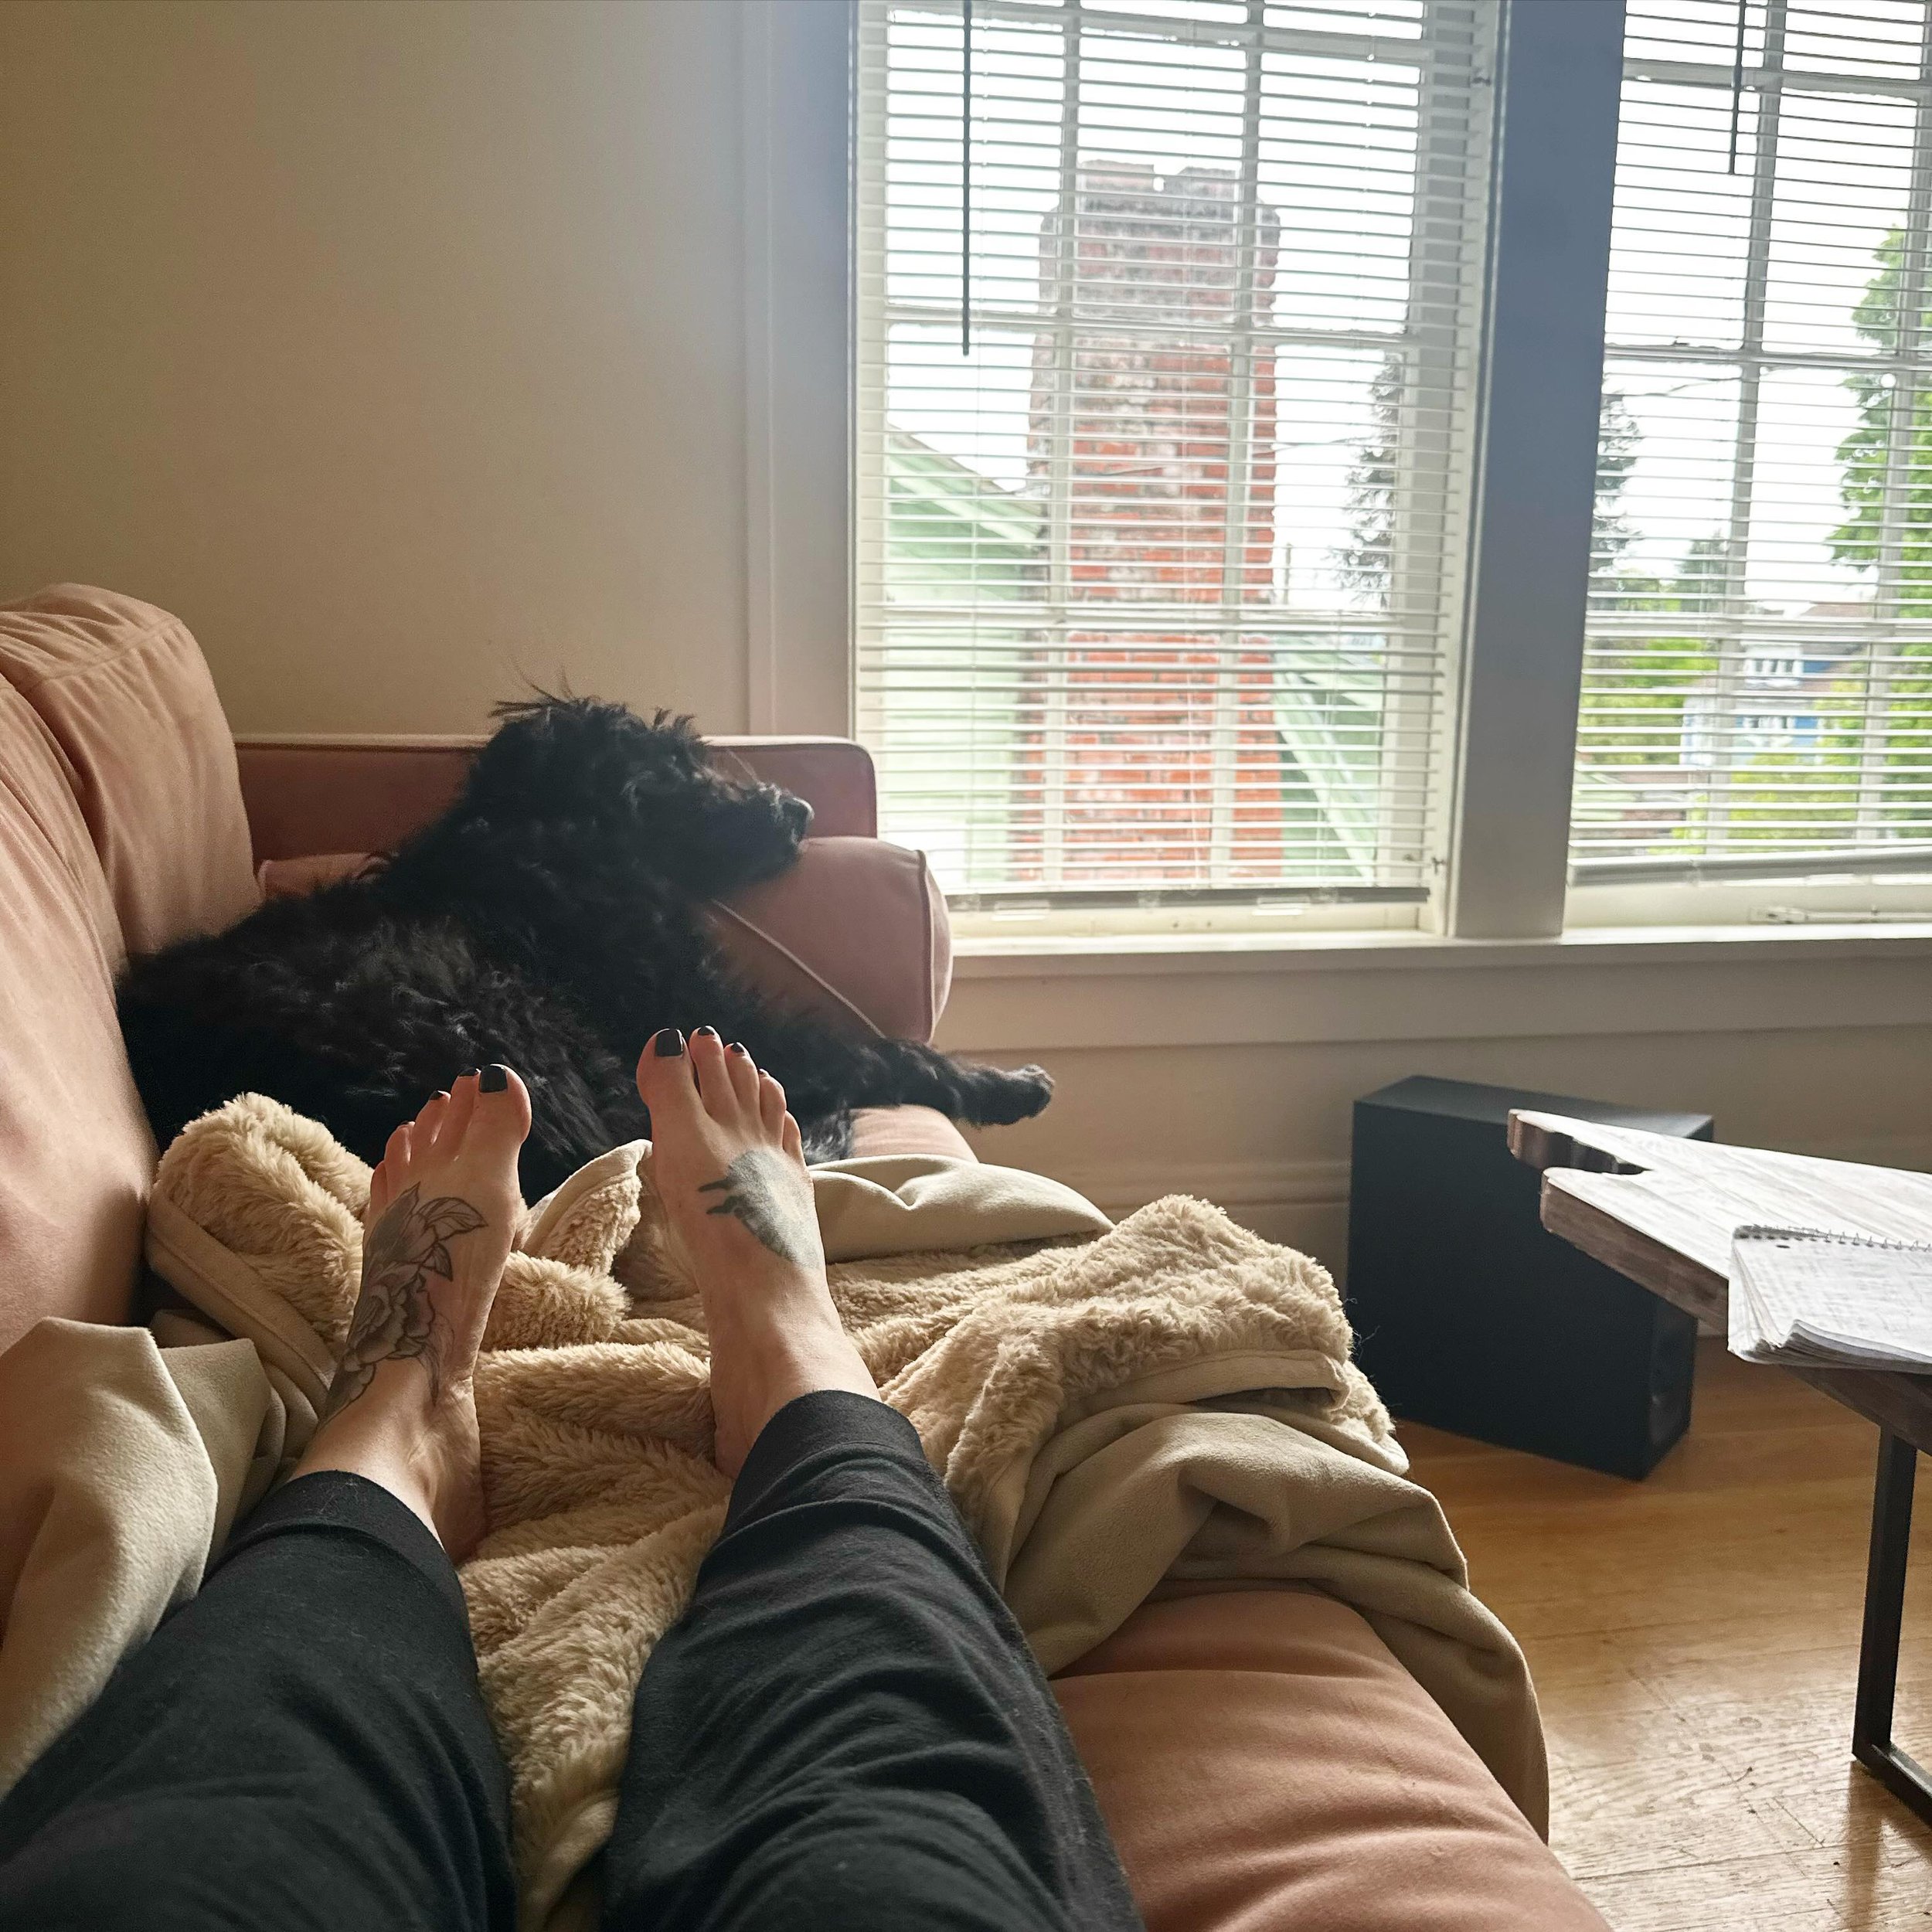 This is what most of my day looked like yesterday after a long walk with a friend by the delta to wear out our pups.

In the spirit of &ldquo;big life living&rdquo; - I&rsquo;ve moved twice in April (solo), furnished an apartment (solo), settled in t